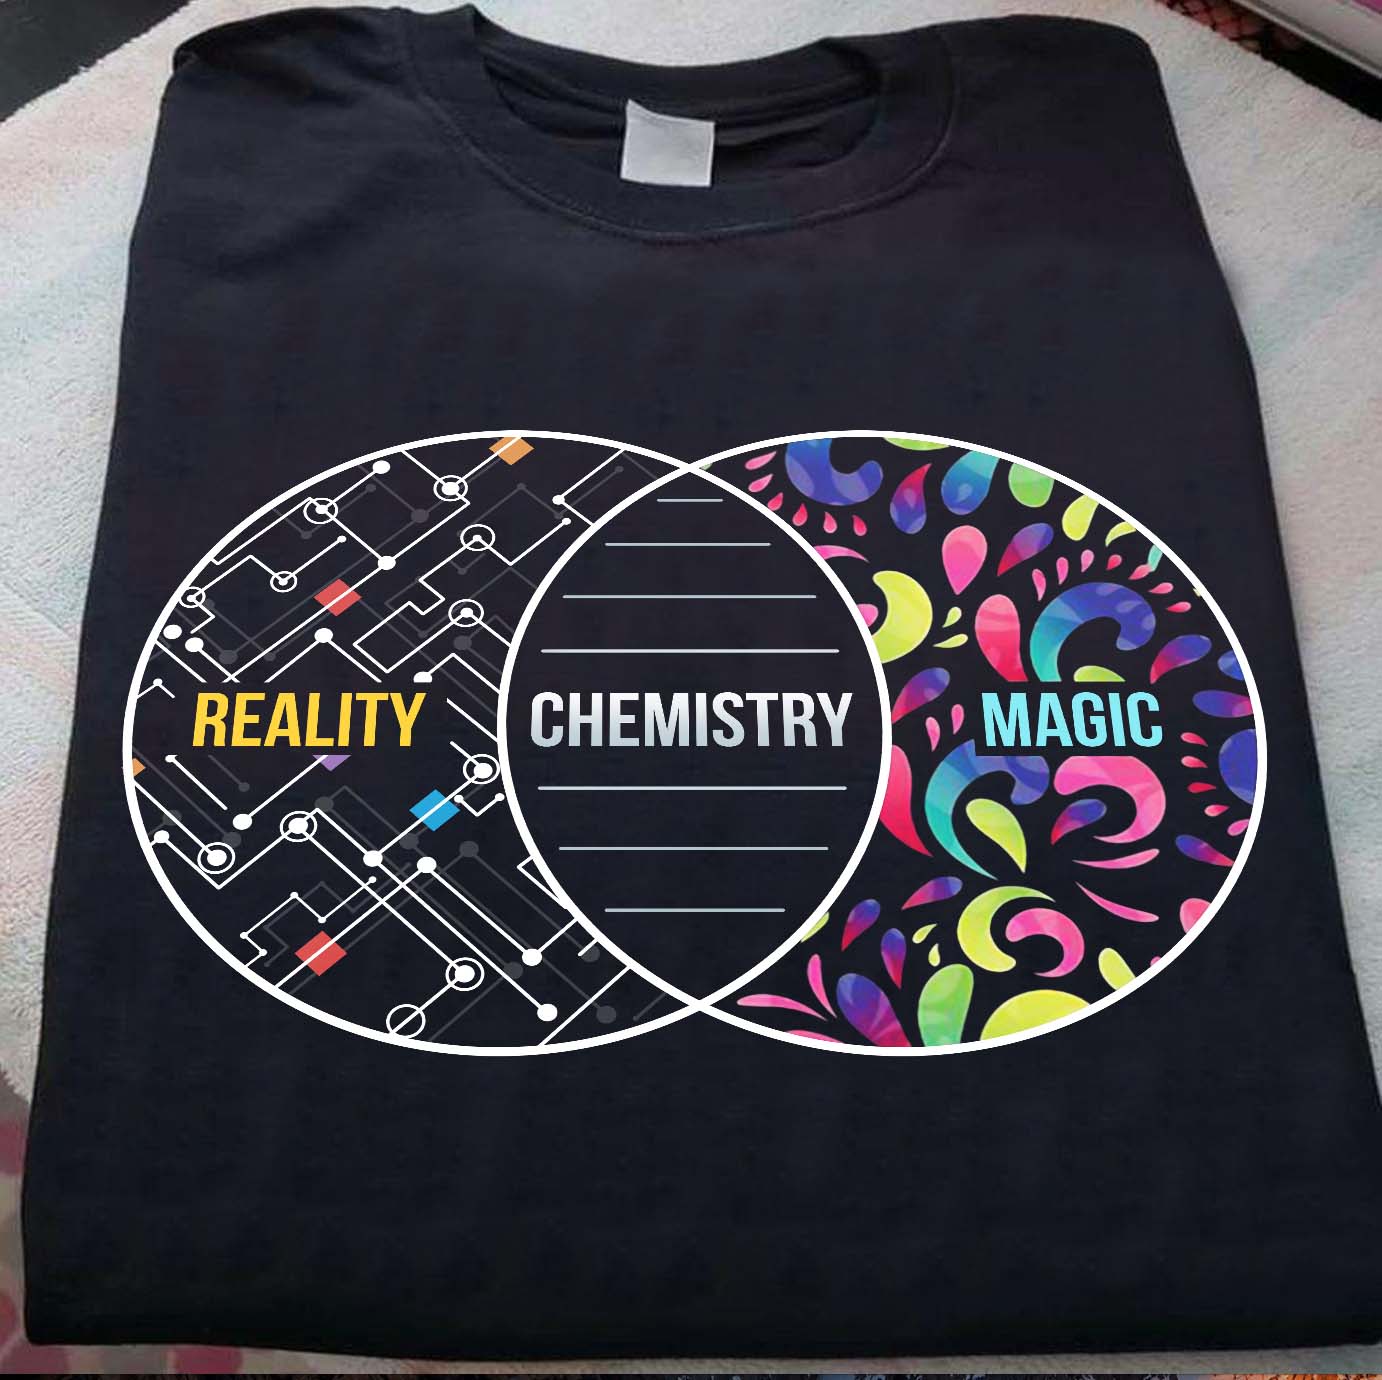 Chemistry is mixed from Reality and Magic